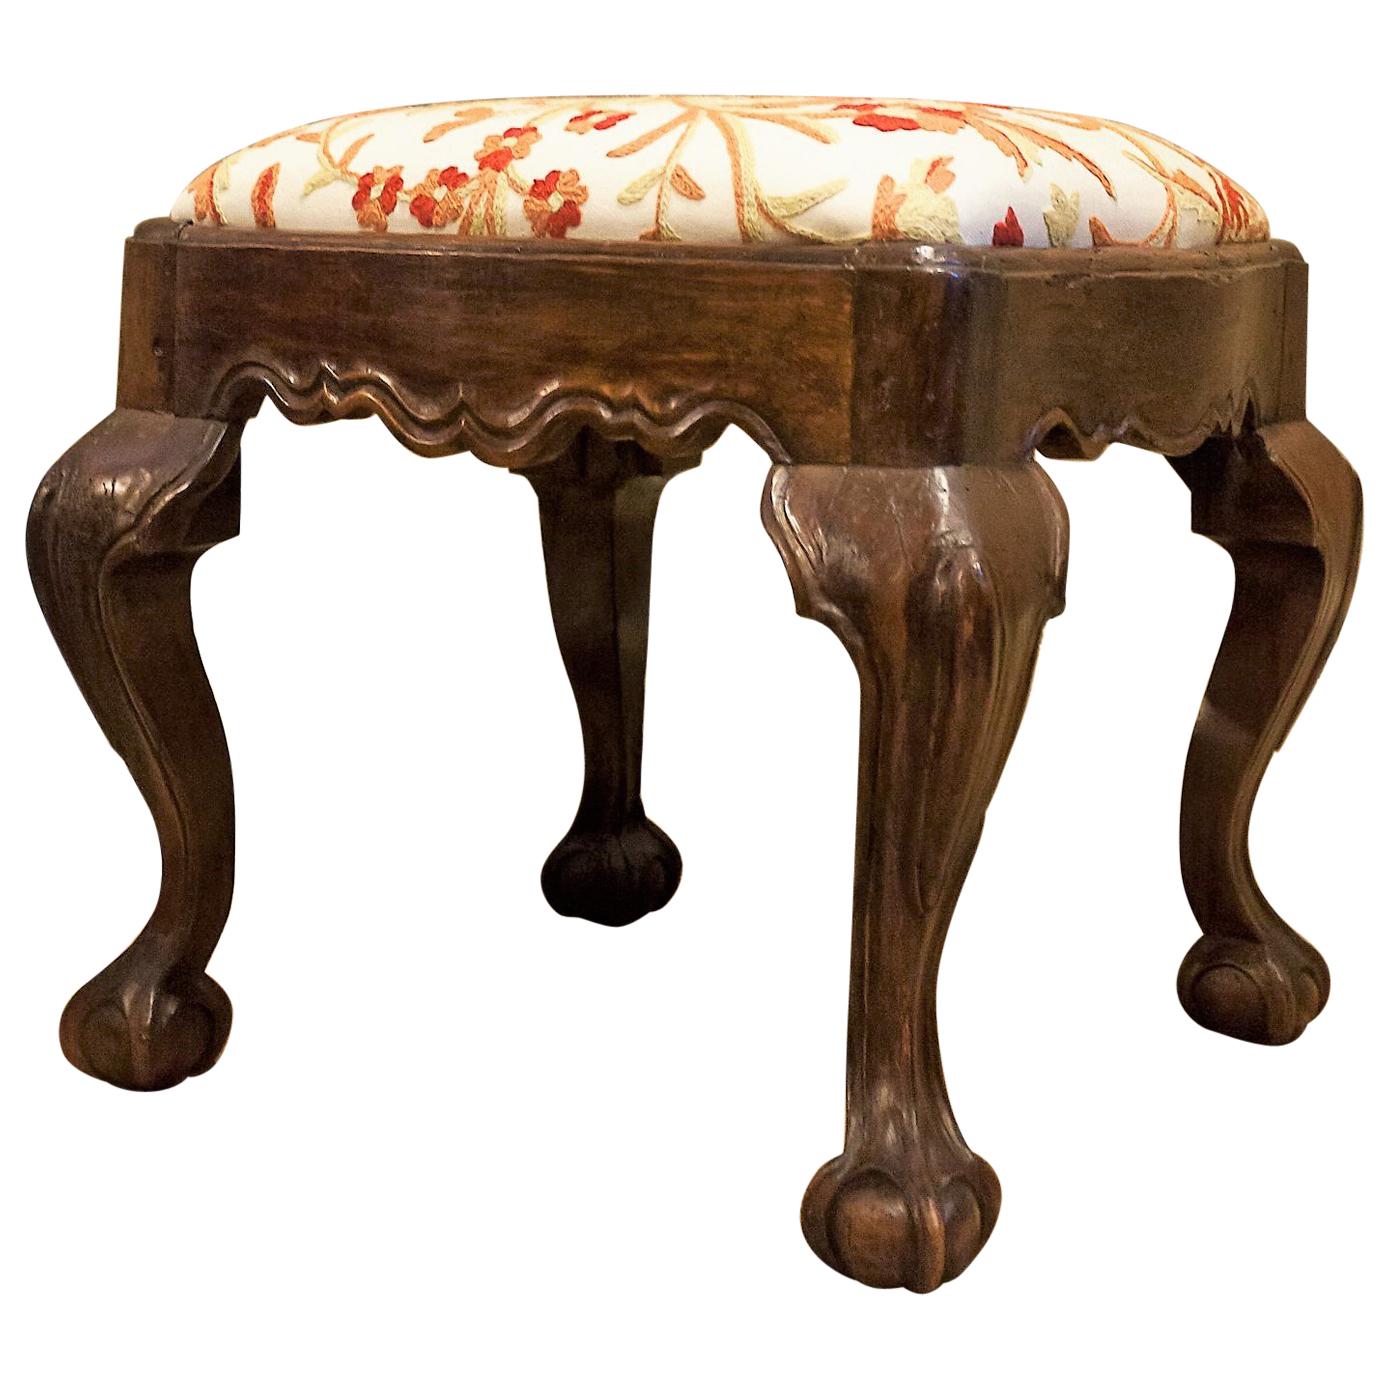 Hand-Carved Walnut Ball-and-Claw Stool, Portugal, circa 1800 For Sale